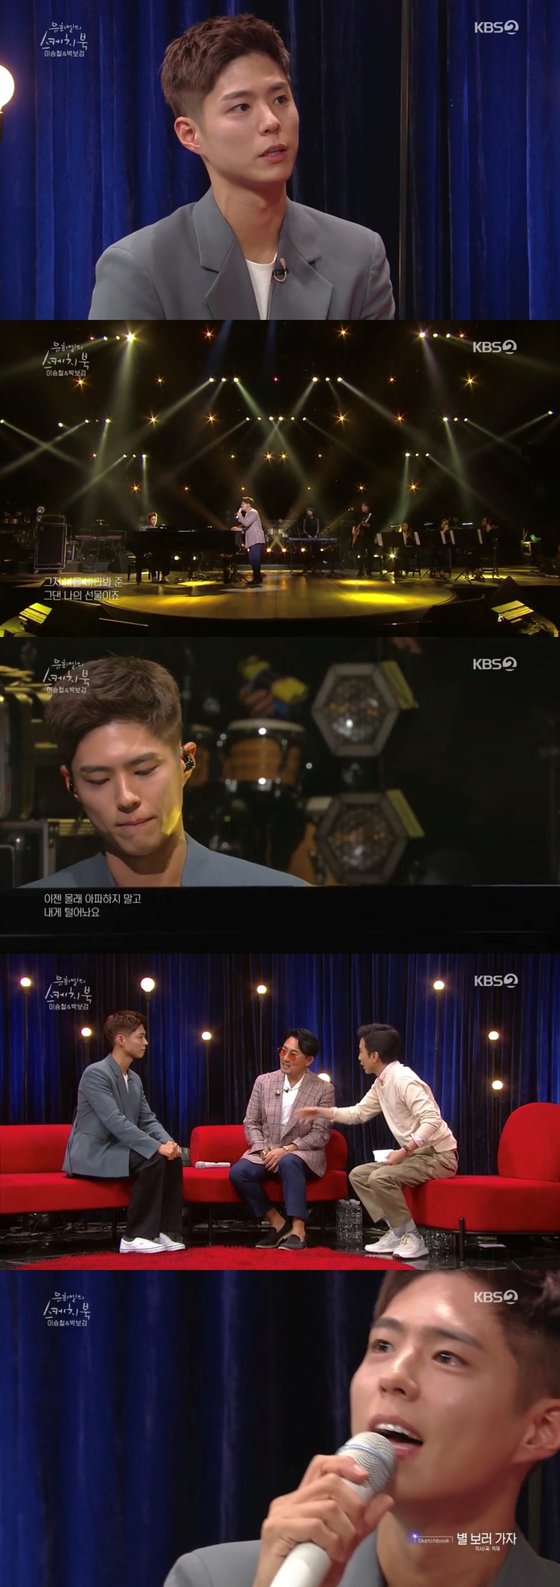 Park Bo-gum appeared on KBS 2TV You Hee-yeols Sketchbook broadcast on the 20th.Park Bo-gum appeared after Lee Seung-cheol made his first stage with the title song My Love, which took the top spot on the music charts of 12 countries, and Lee Seung-cheol and webtoon Moonlight Sculptor OST I Love You stage.Lee Seung-cheol sang to Park Bo-gums Piano performance.Park Bo-gums Piano ability is well known among fans, and this is the first time that I have collaborated with singers on ITZY and Music broadcasts.Lee Seung-cheol praised Park Bo-gums Piano performance, saying it is never easy to play Piano in line with the bands performance.Park Bo-gum was improvised at the request of You Hee-yeol, singing Lee Seung-cheols Western Sky and The Good Man with Pianos performance.He also played Chopstick March with You Hee-yeol.Park Bo-gum also mentioned SAM KIM and ongoing projects.Park Bo-gum, who dreamed of a singer-songwriter before his debut as an actor, said he had become an actor with the suggestion of his agency representative and still did not abandon his dream of a singer-songwriter.Park Bo-gum said, We are preparing a project with SAM KIM of antenna music. He called short Lets go to the star of the load in the advertisement.I like the poor voice, I pick these guys for auditions, Lee Seung-cheol said.In the aftermath of Corona 19, Park Bo-gums Lee Seung-cheol and the stage completed with Park Bo-gum gave healing to the audience in the first row.